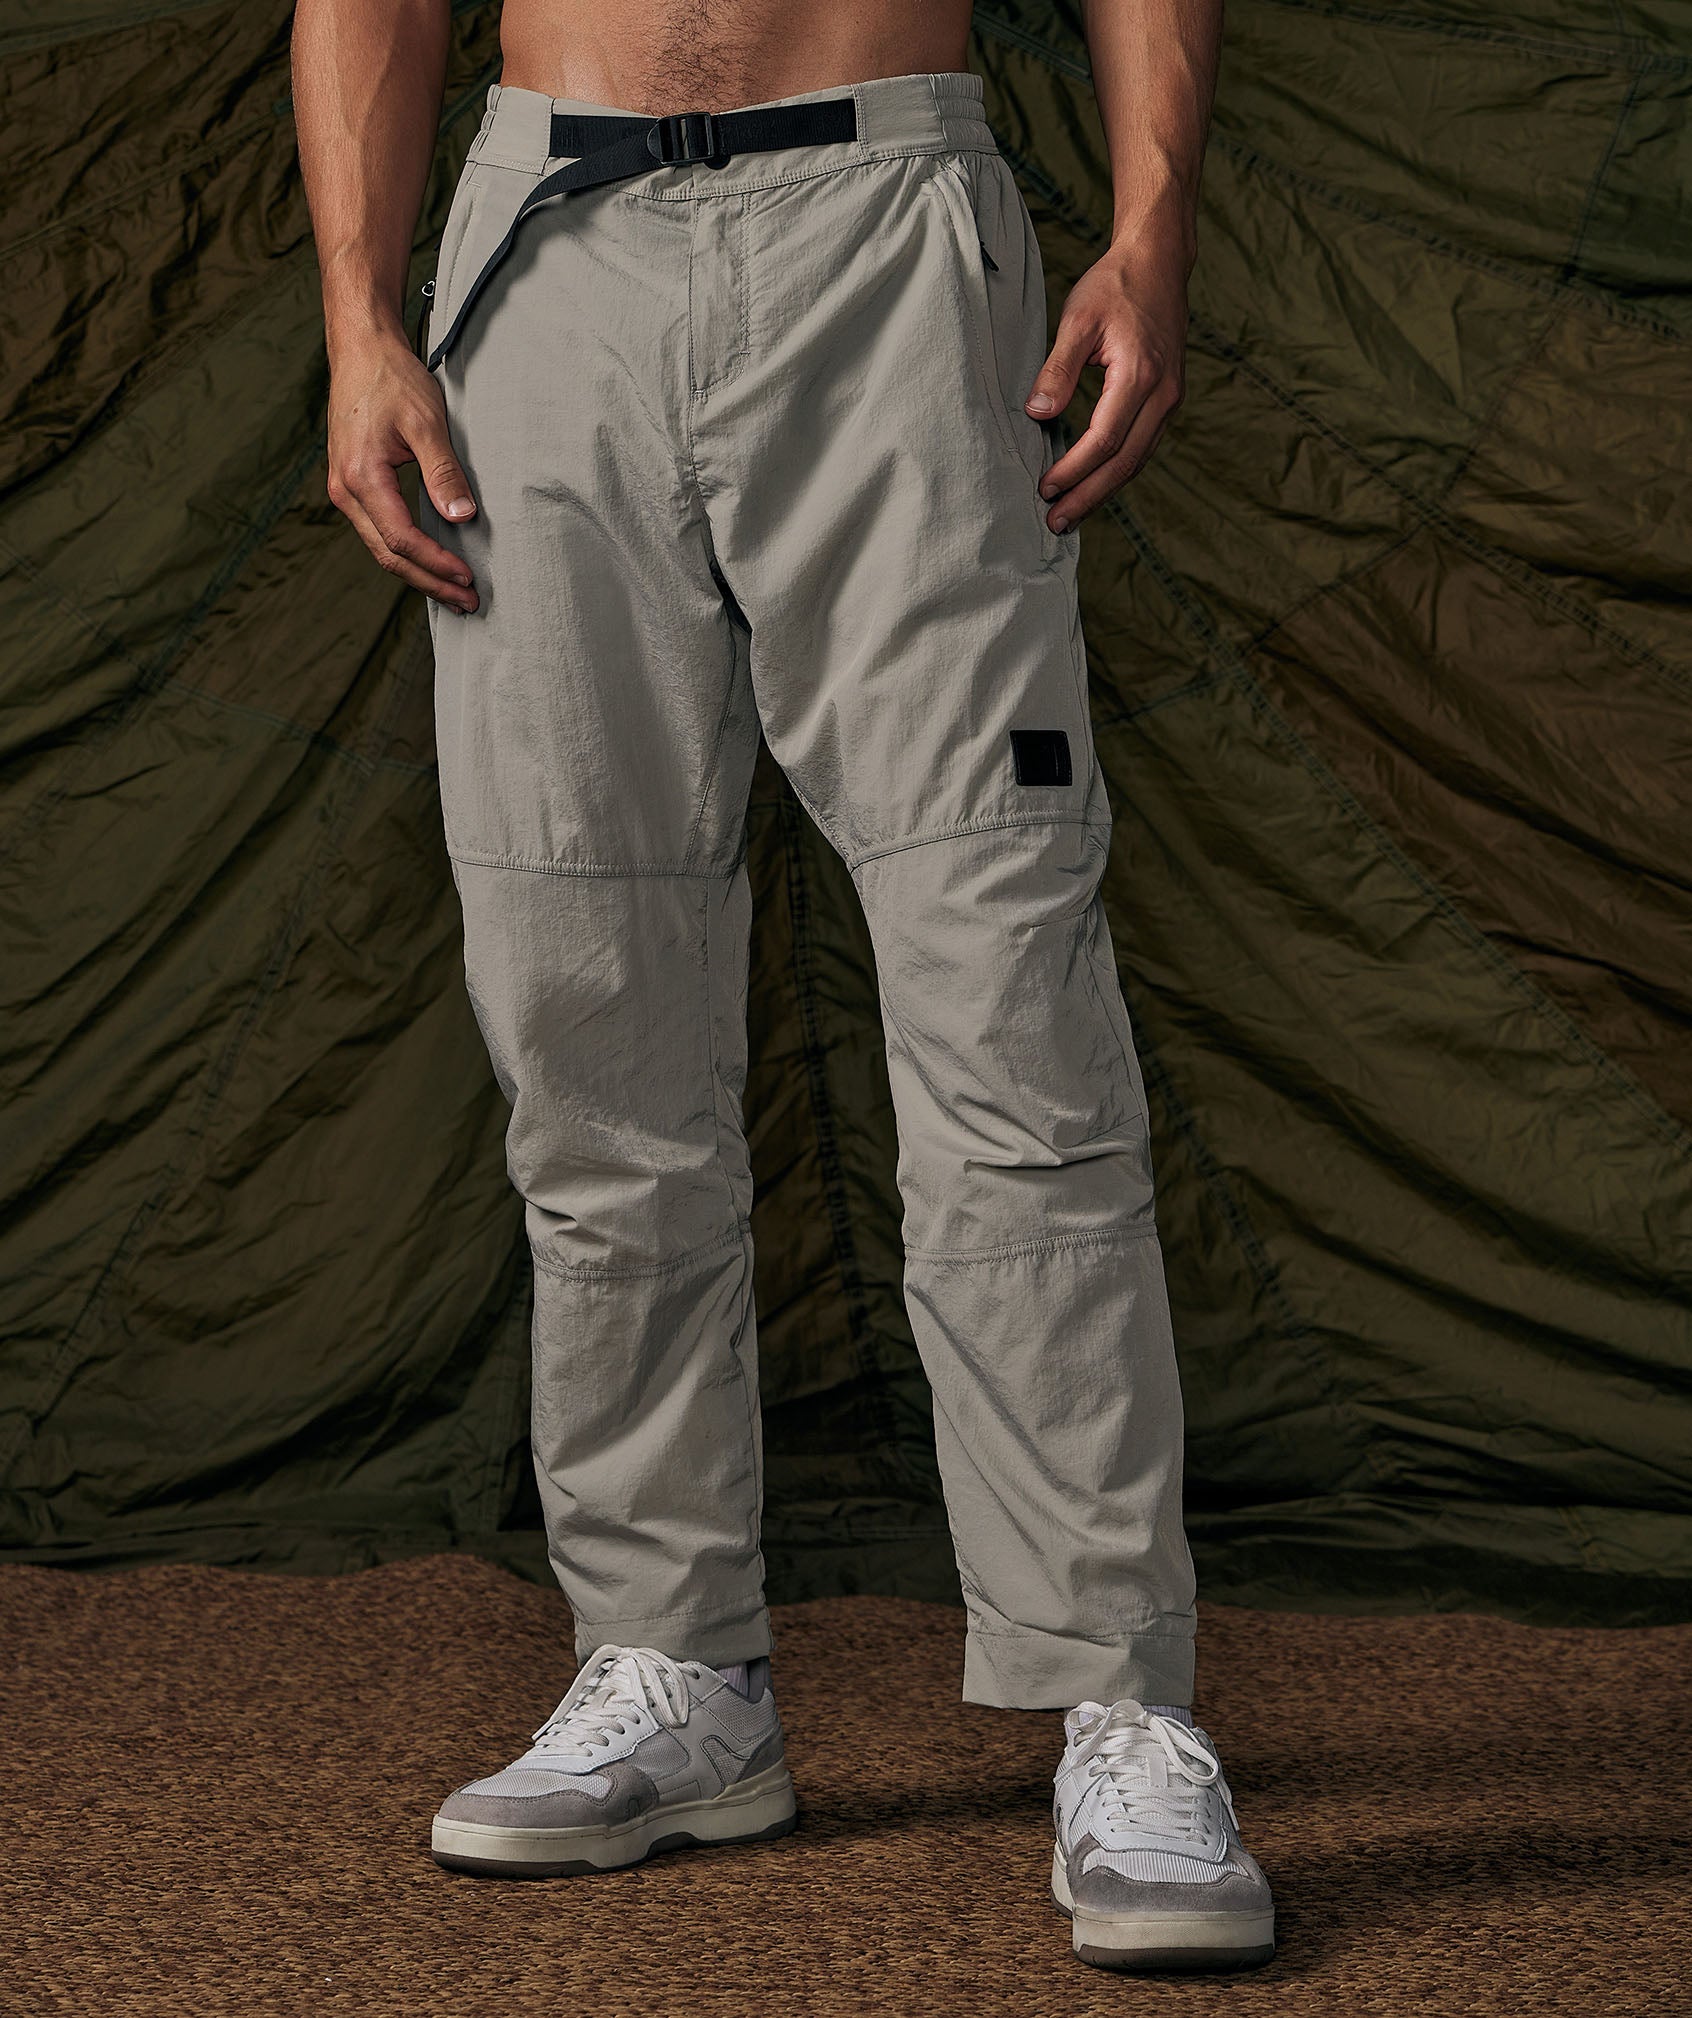 Retake Woven Joggers in Taupe Grey - view 1